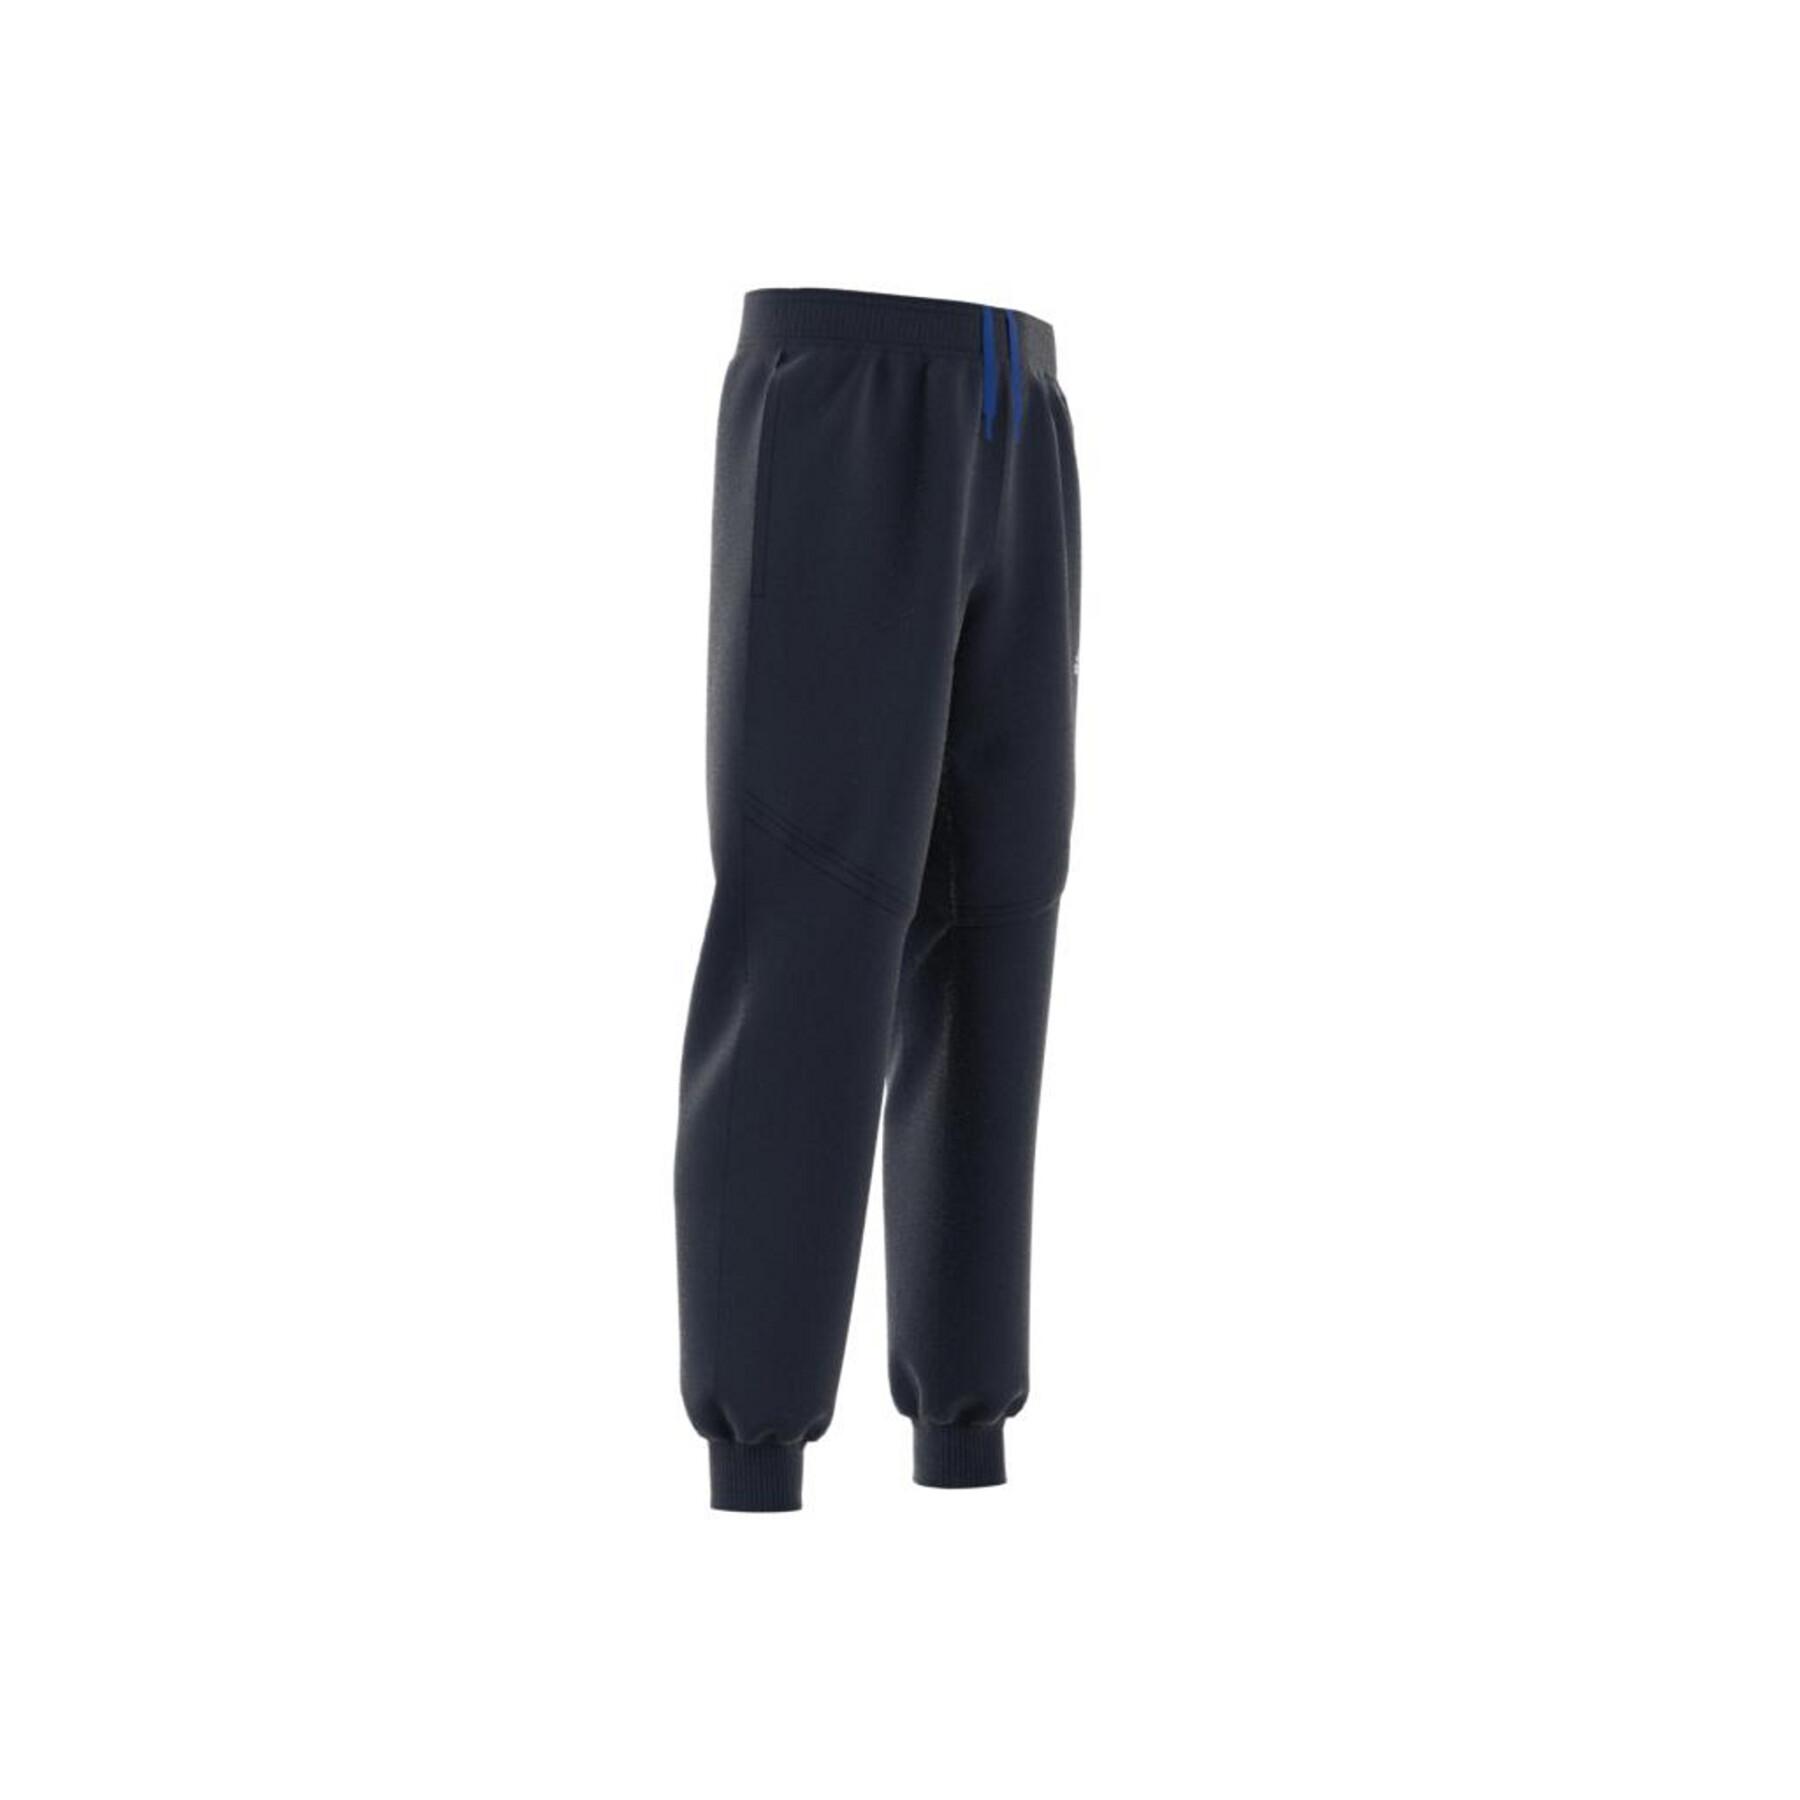 Children's trousers adidas Xfg